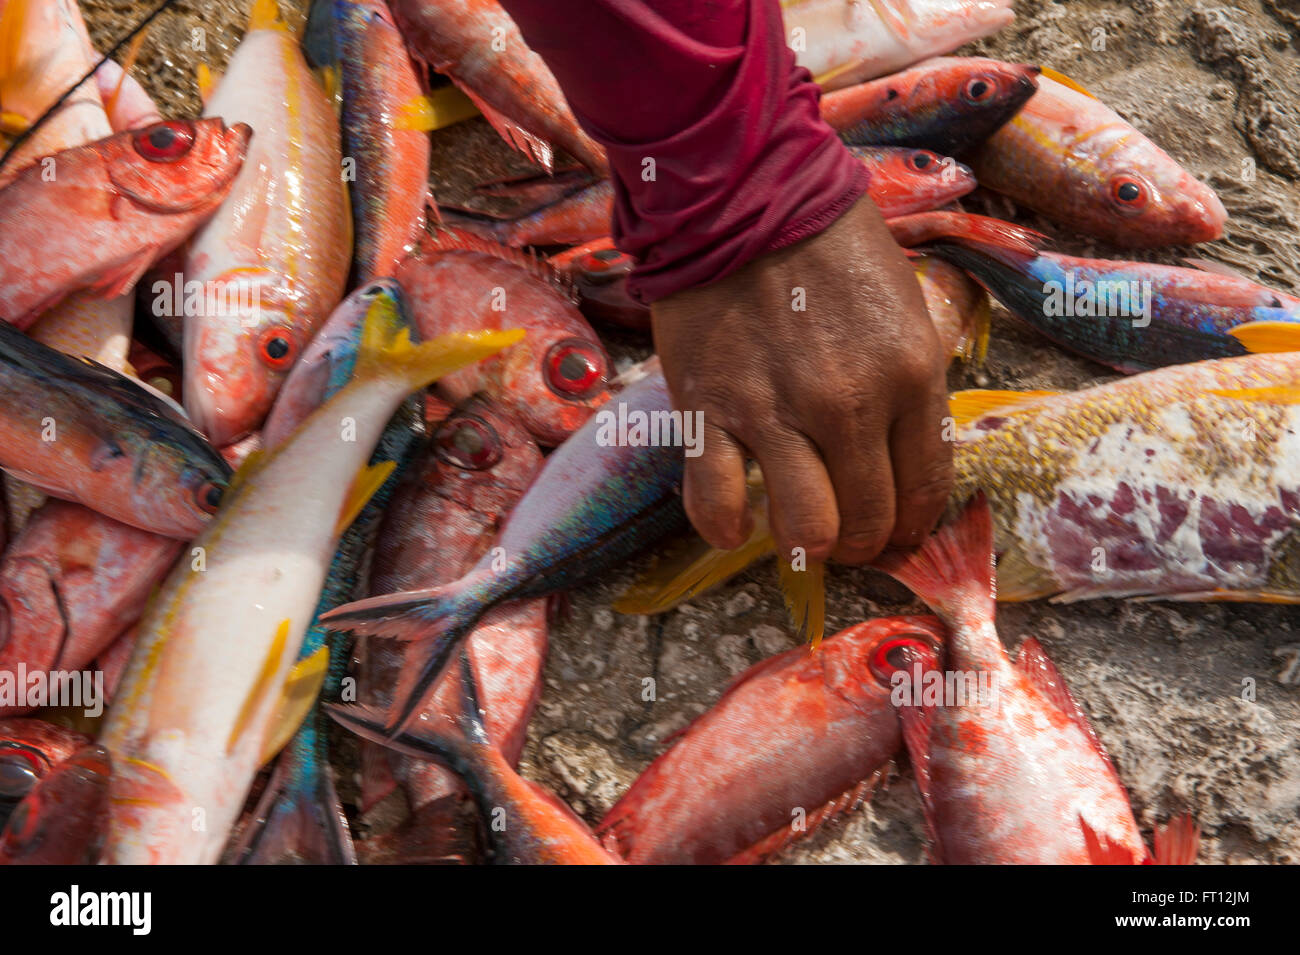 Hand reaching for colourful fish on sale at a fish market, Makemo, Tuamotu Islands, French Polynesia, South Pacific Stock Photo